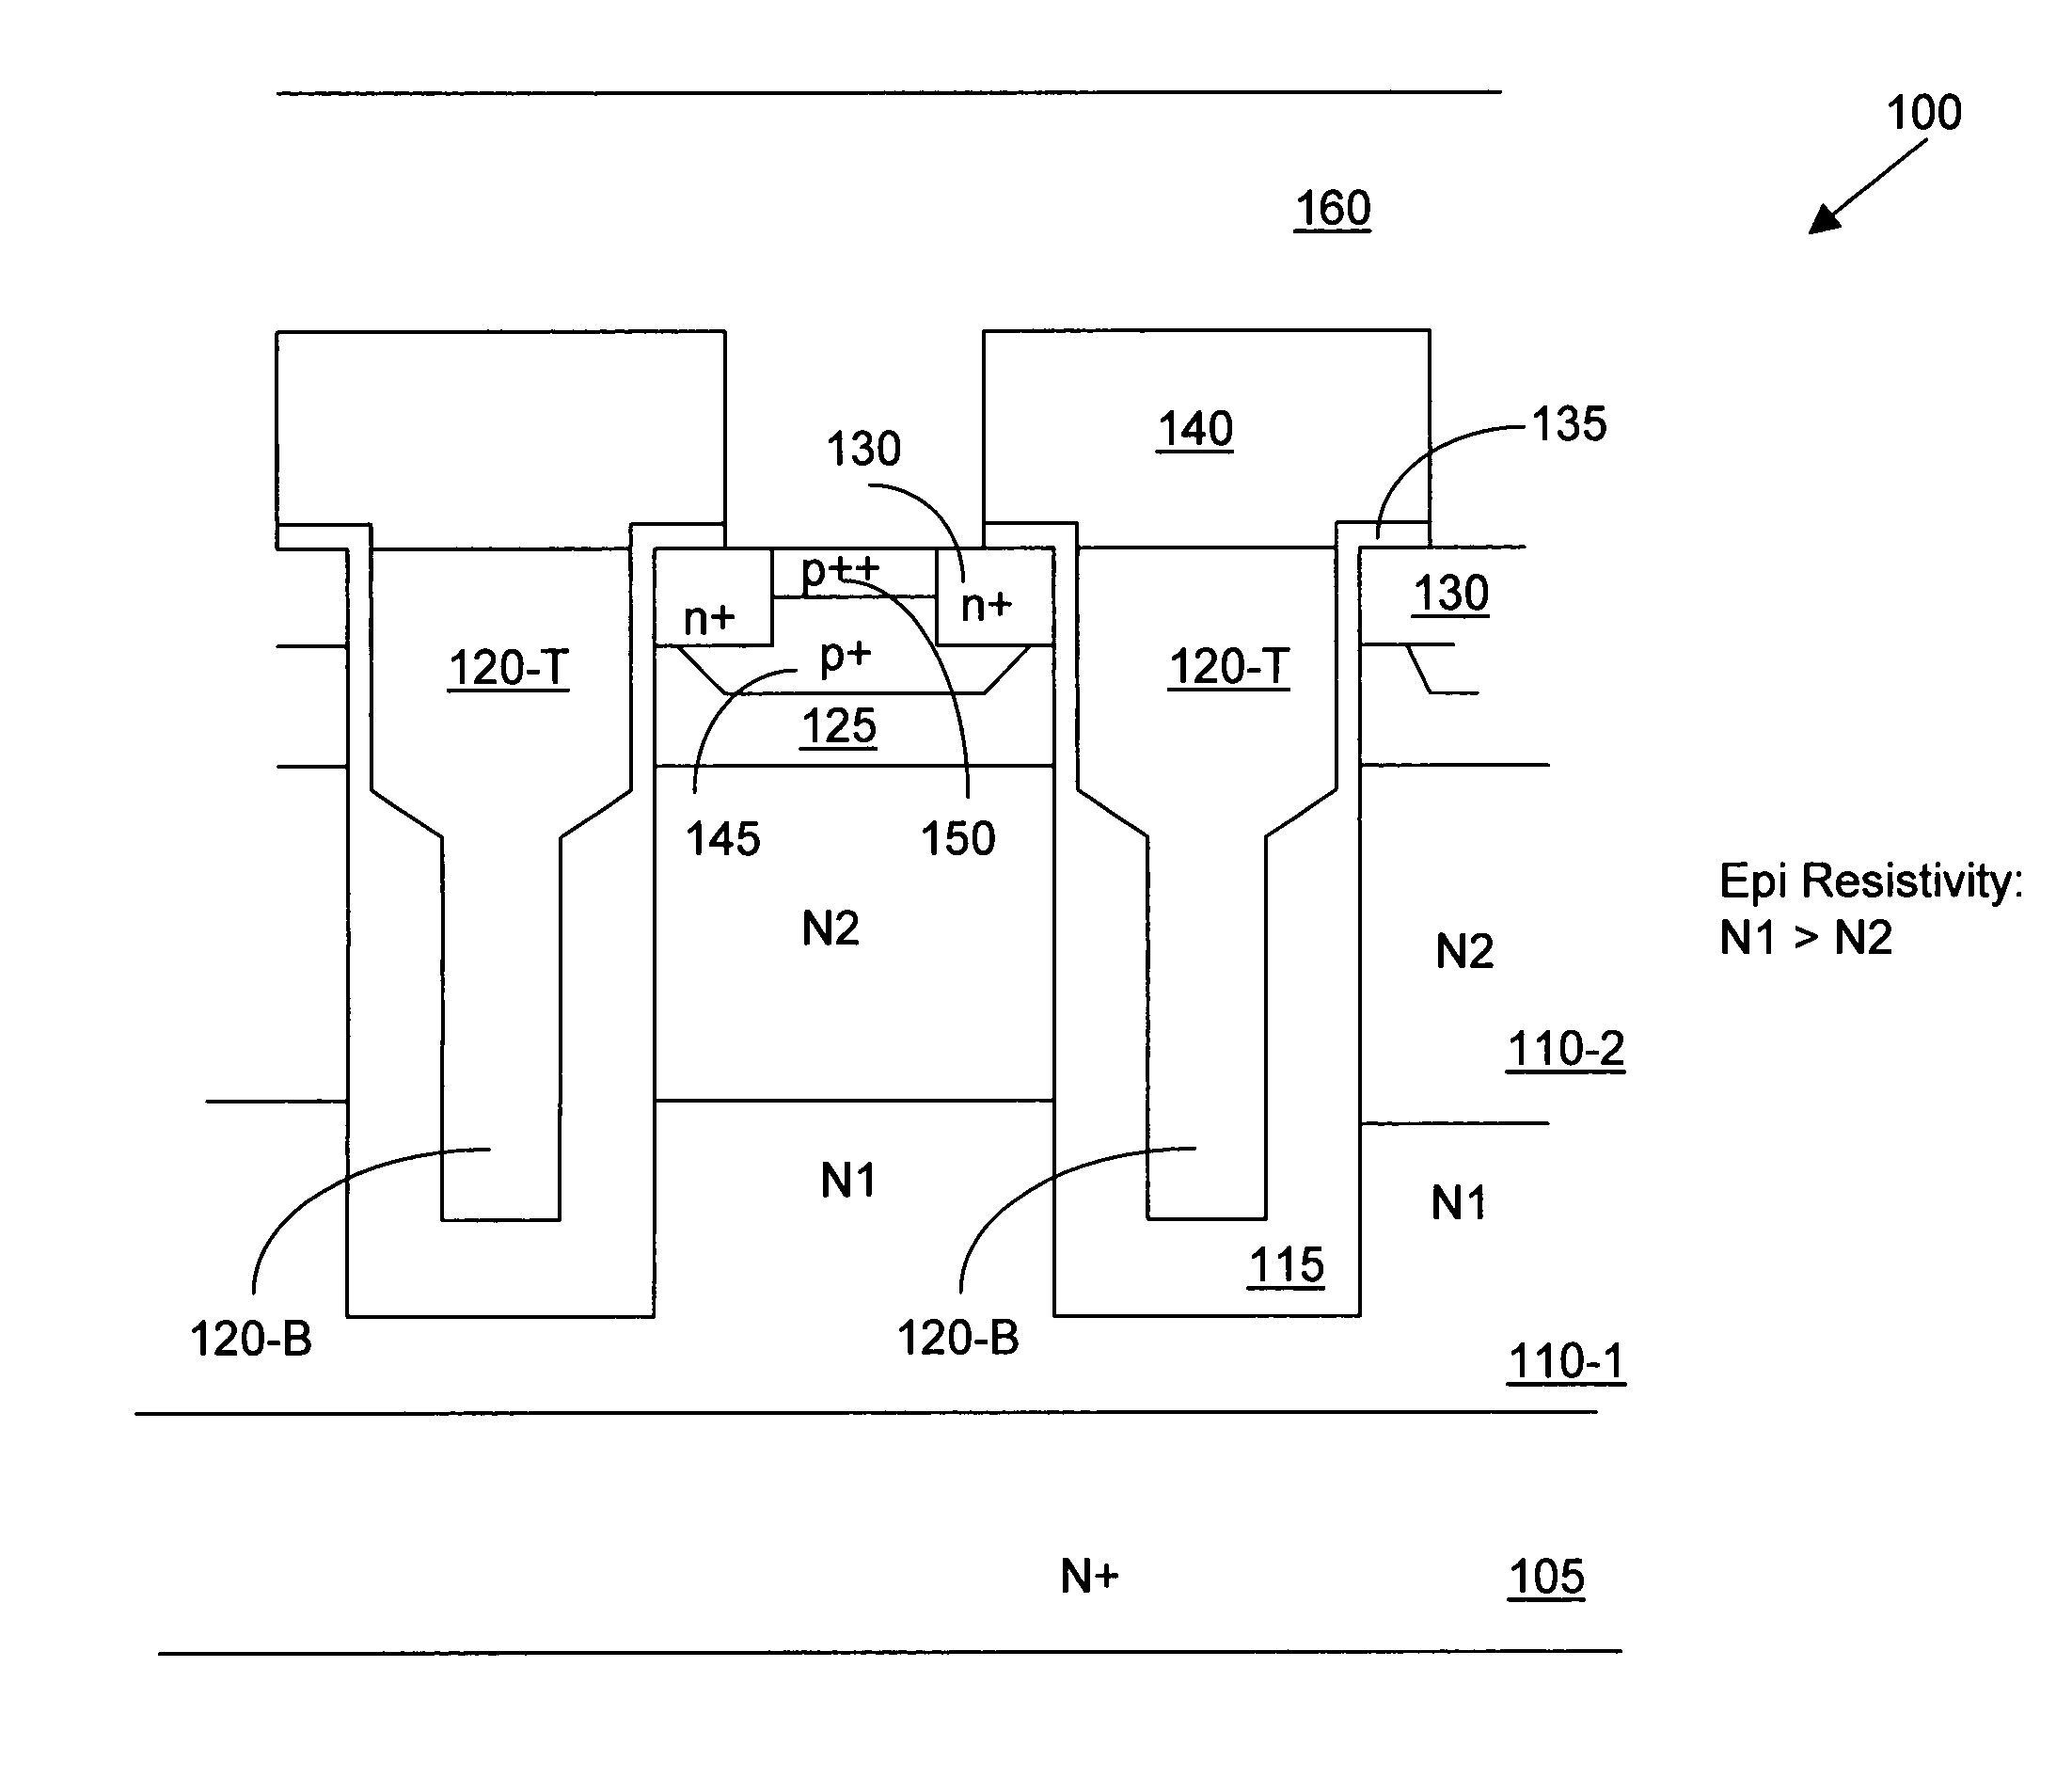 Trench MOSFET with double epitaxial structure